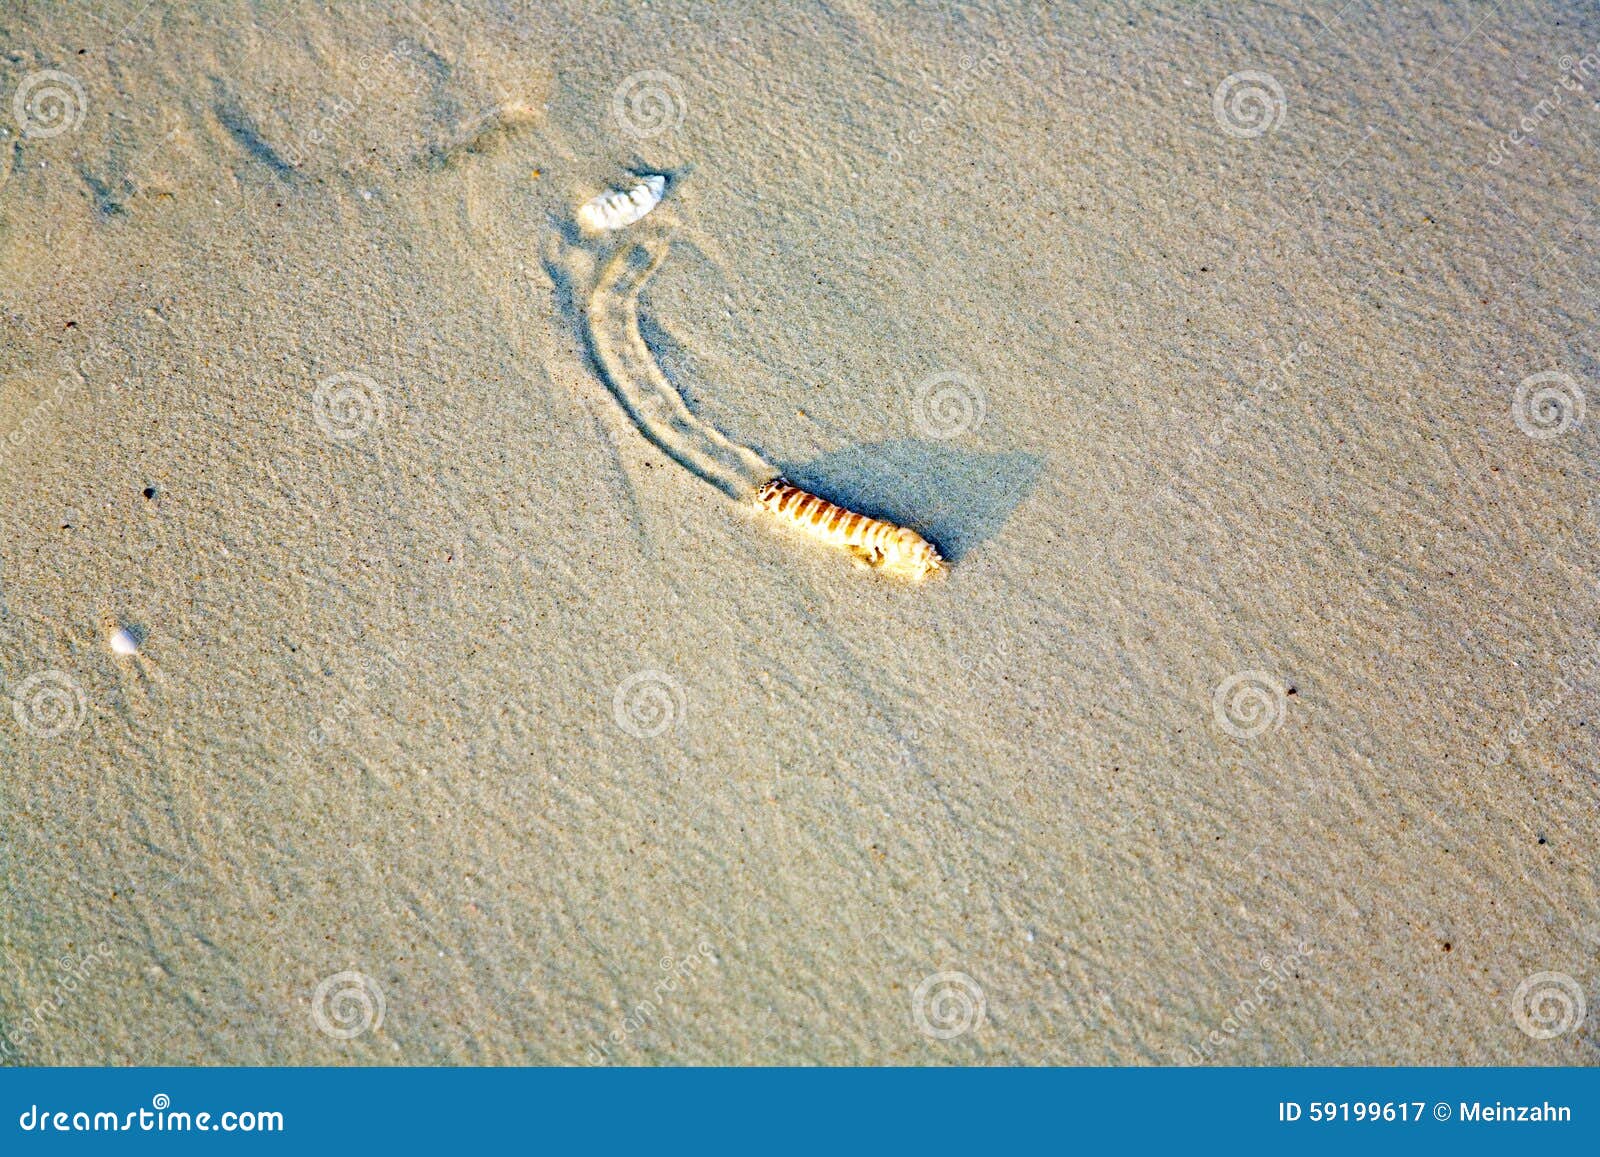 Sandworm at the beach stock image. Image of crawling - 59199617